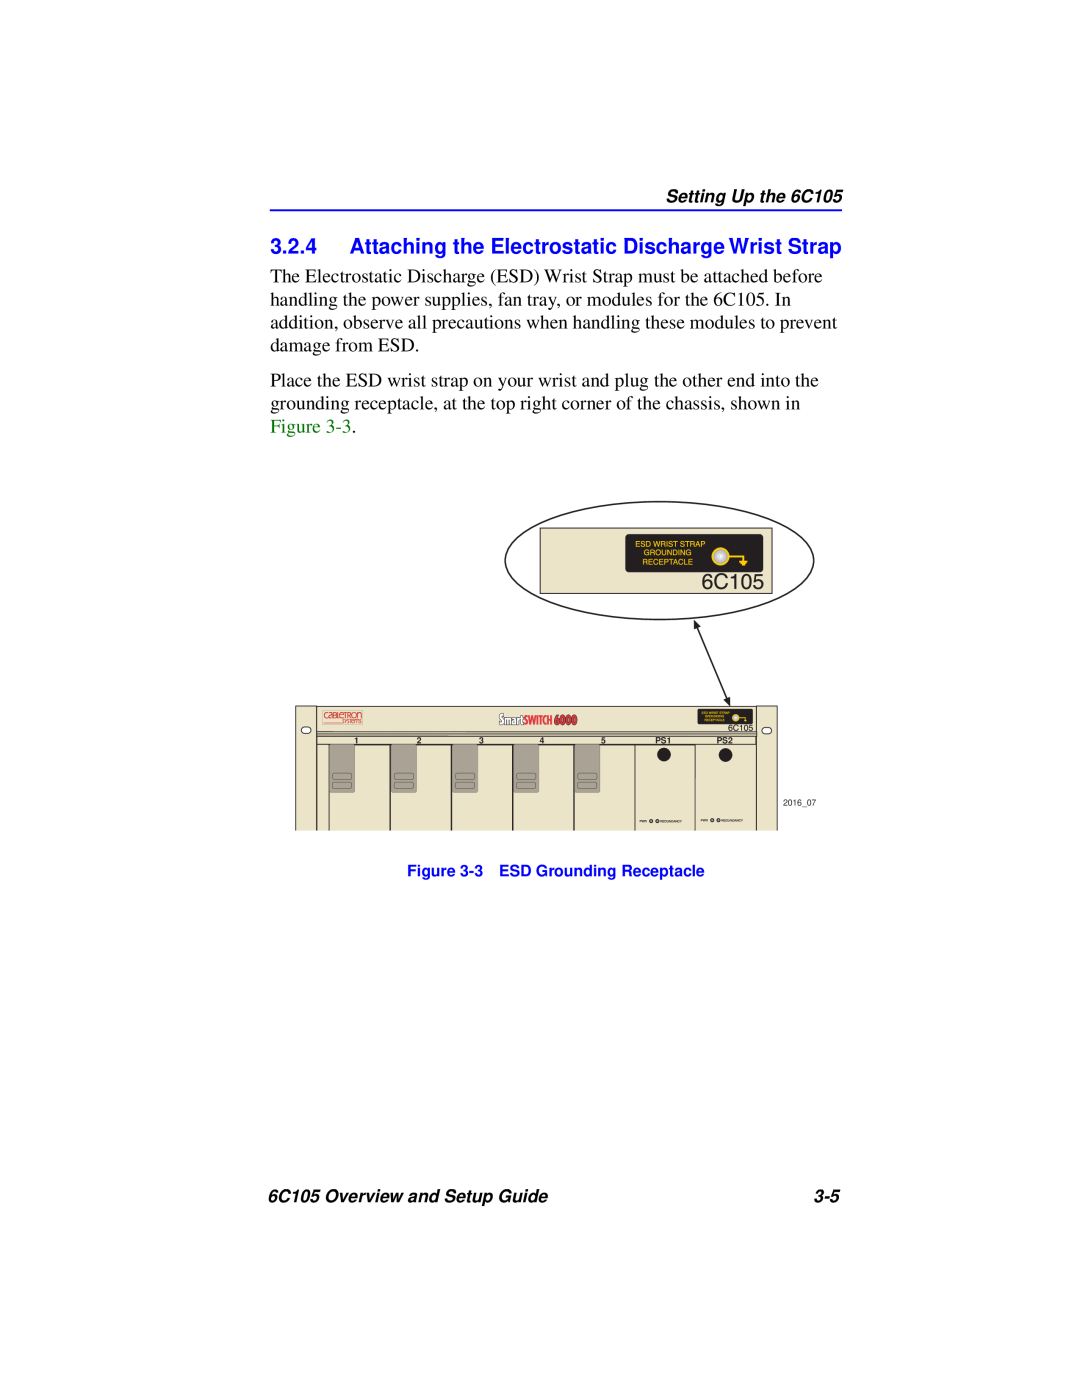 Cabletron Systems 6C105 setup guide Attaching the Electrostatic Discharge Wrist Strap, 3 ESD Grounding Receptacle 